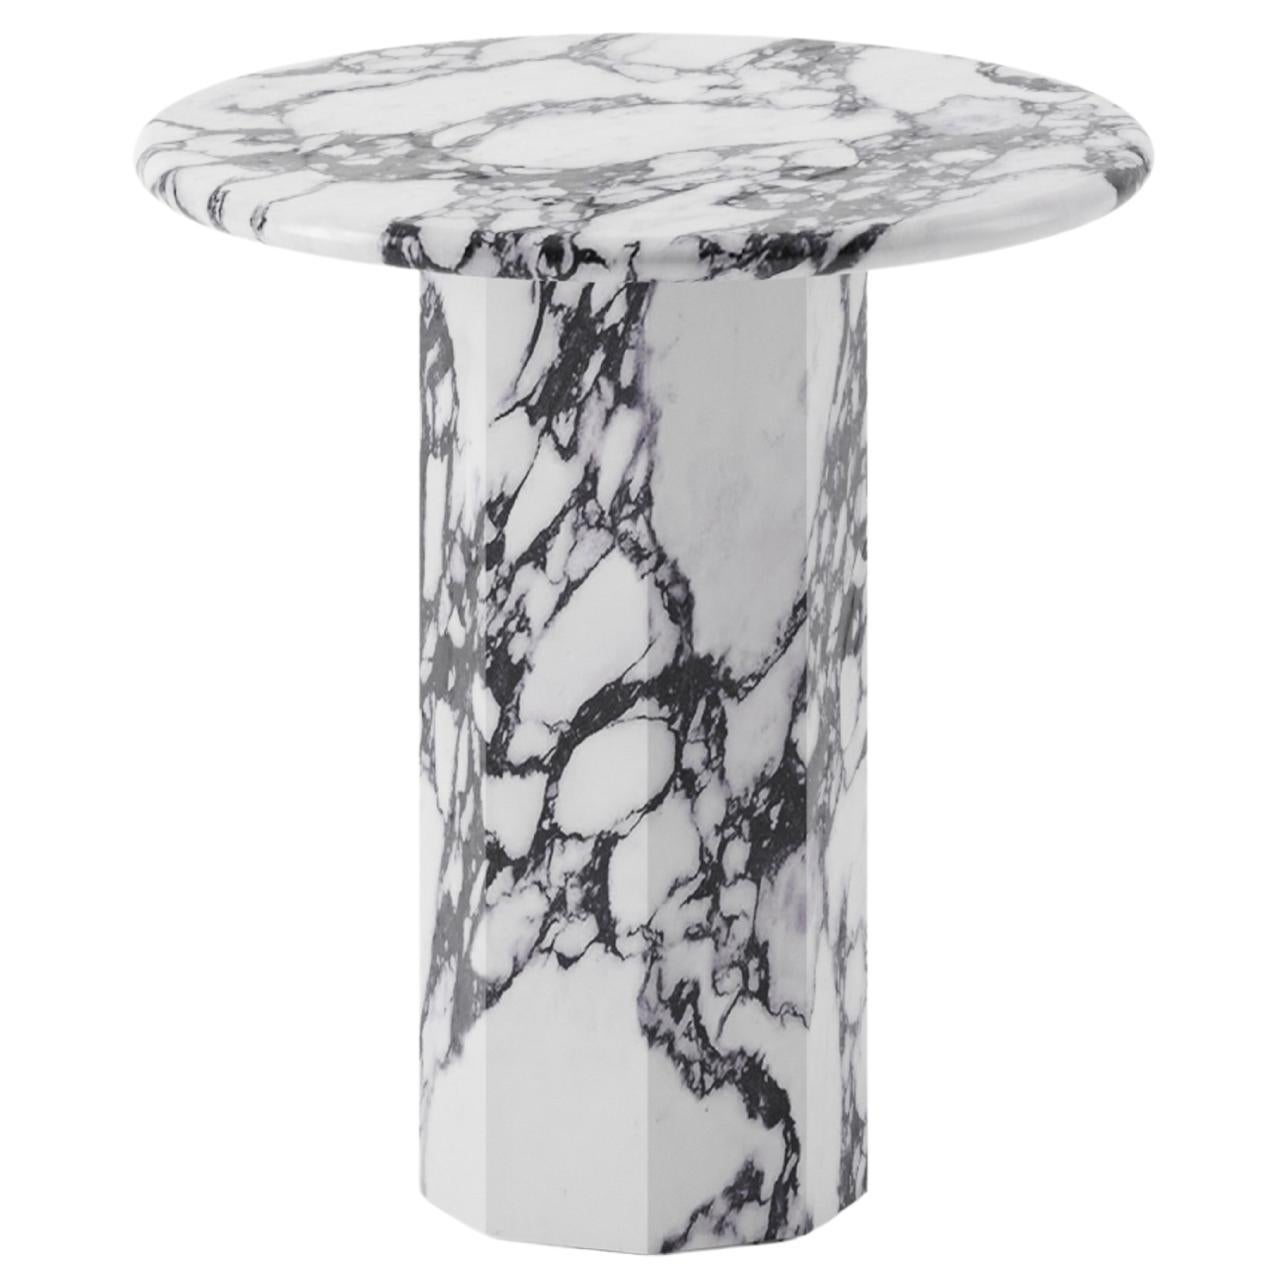 Pair of Ashby Round Side Table Handcrafted in Calacatta Viola Marble